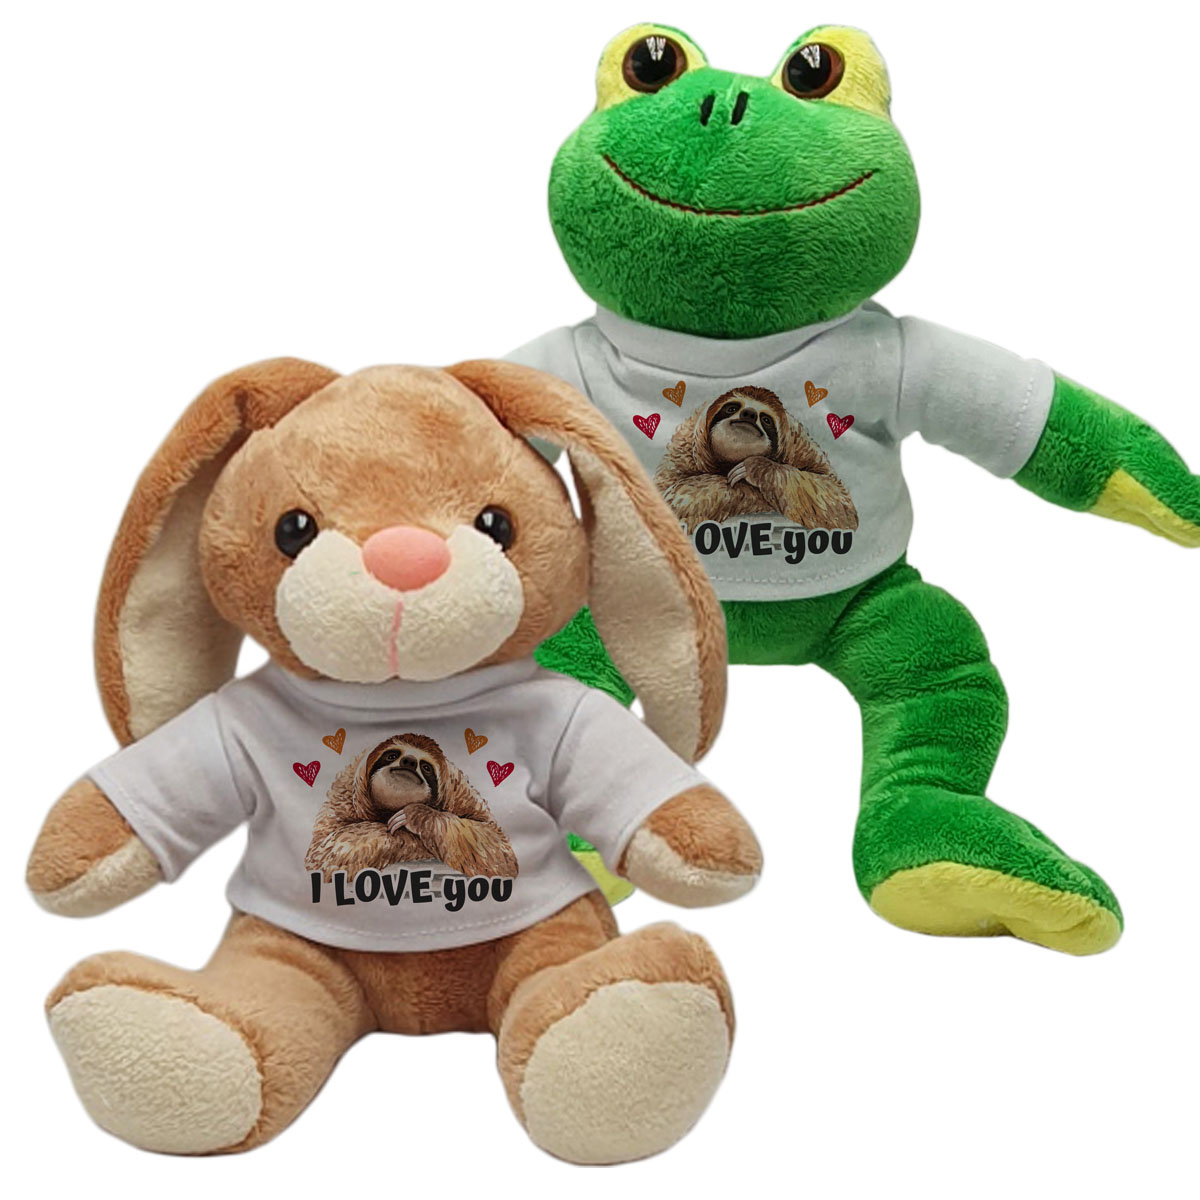 Stofftier mit Shirt "I love you" | Hase